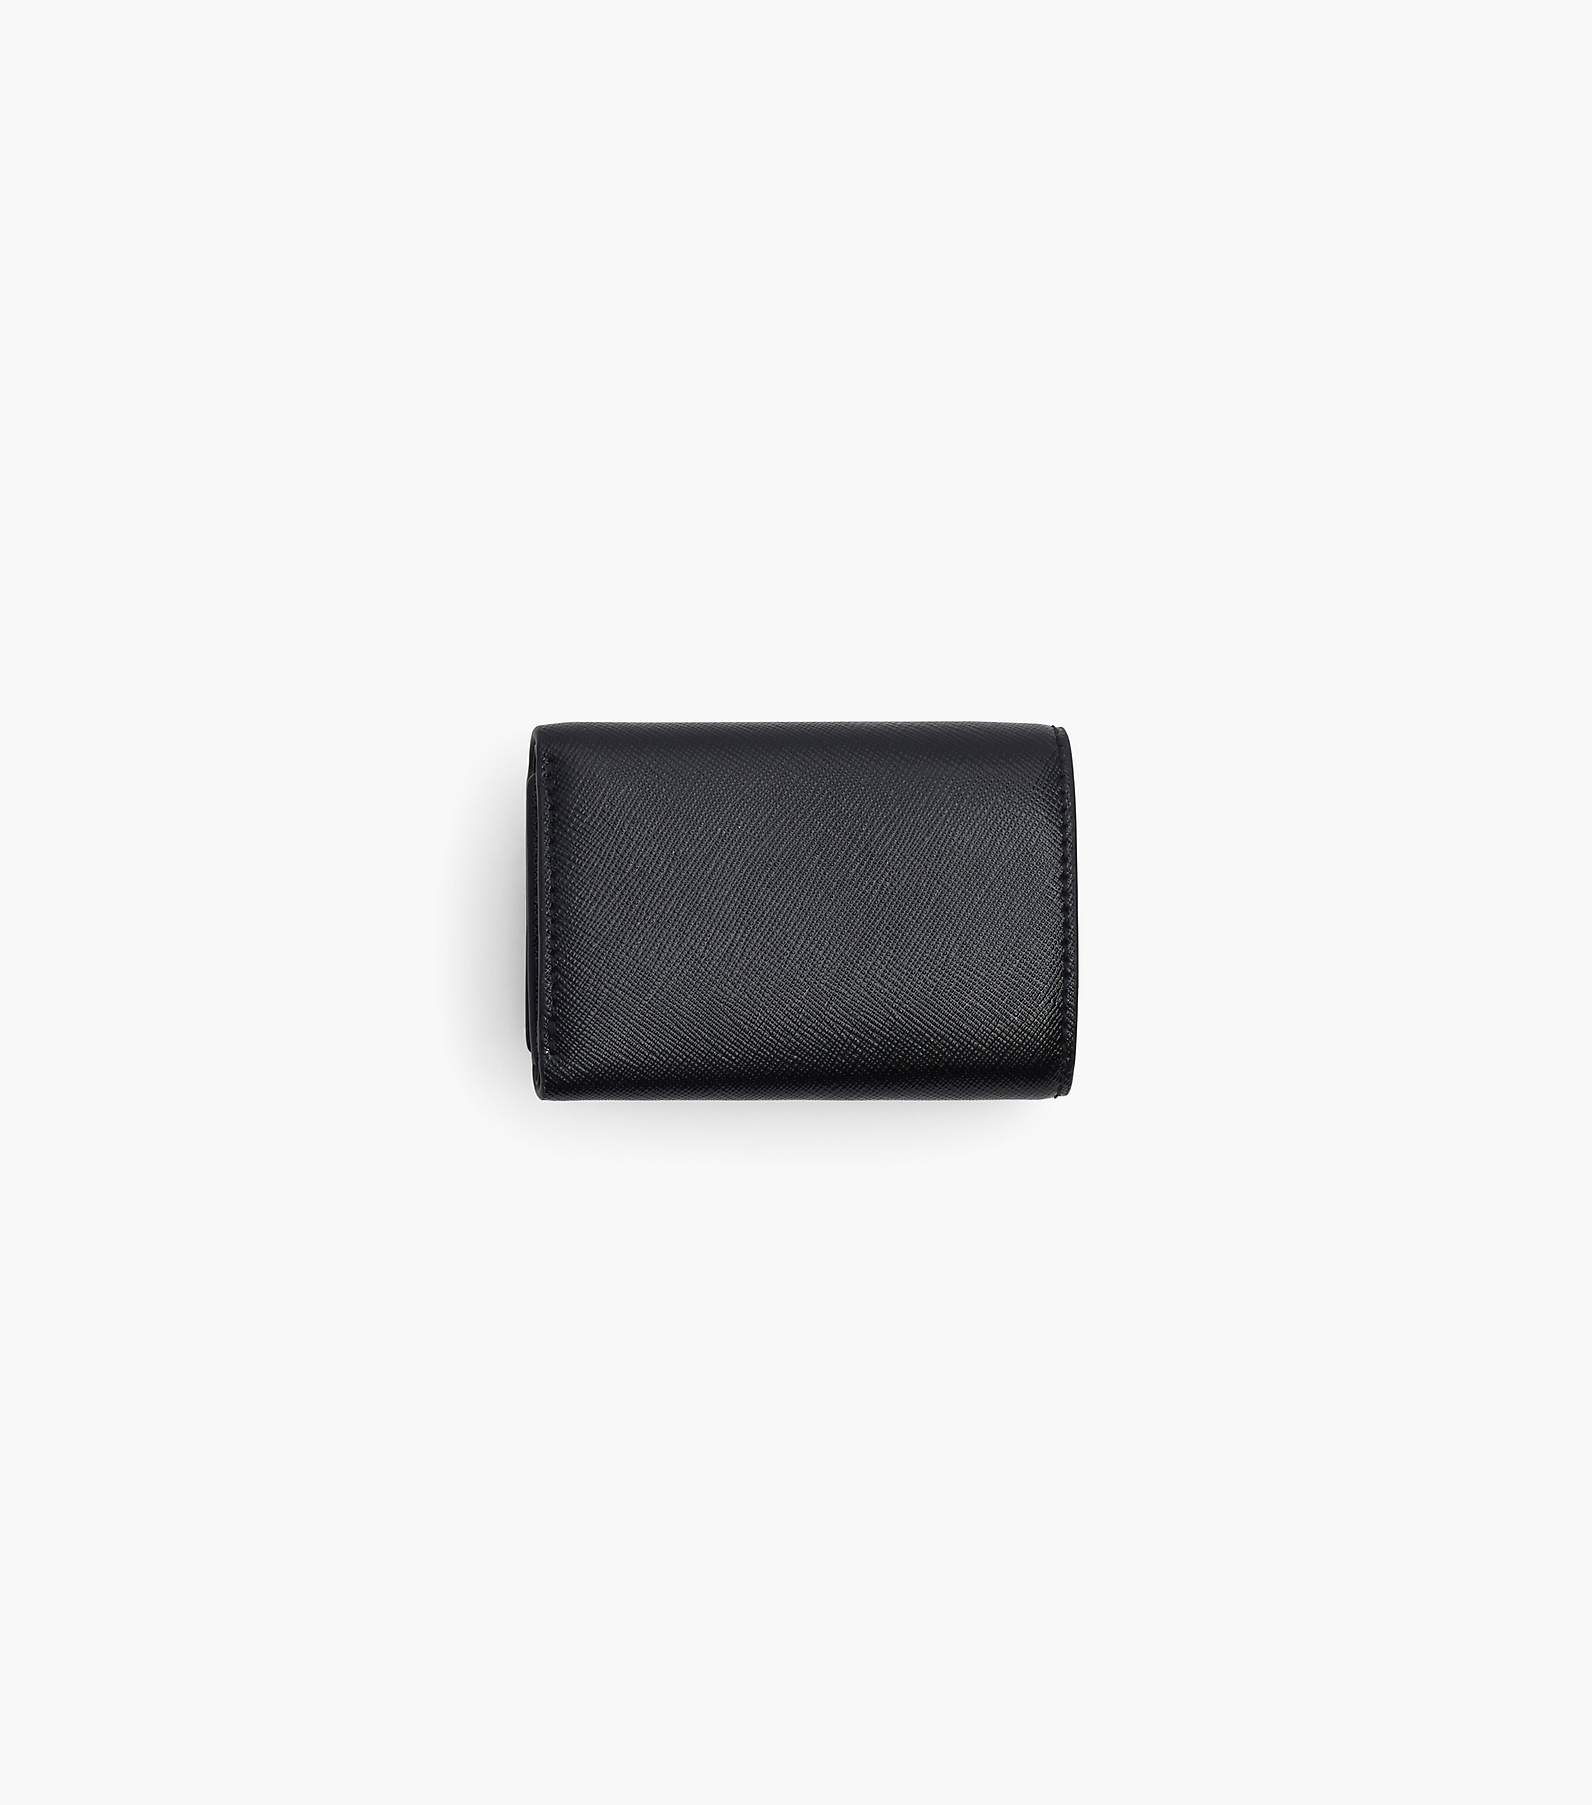 Marc Jacobs 'The Utility Snapshot Mini Compact Wallet